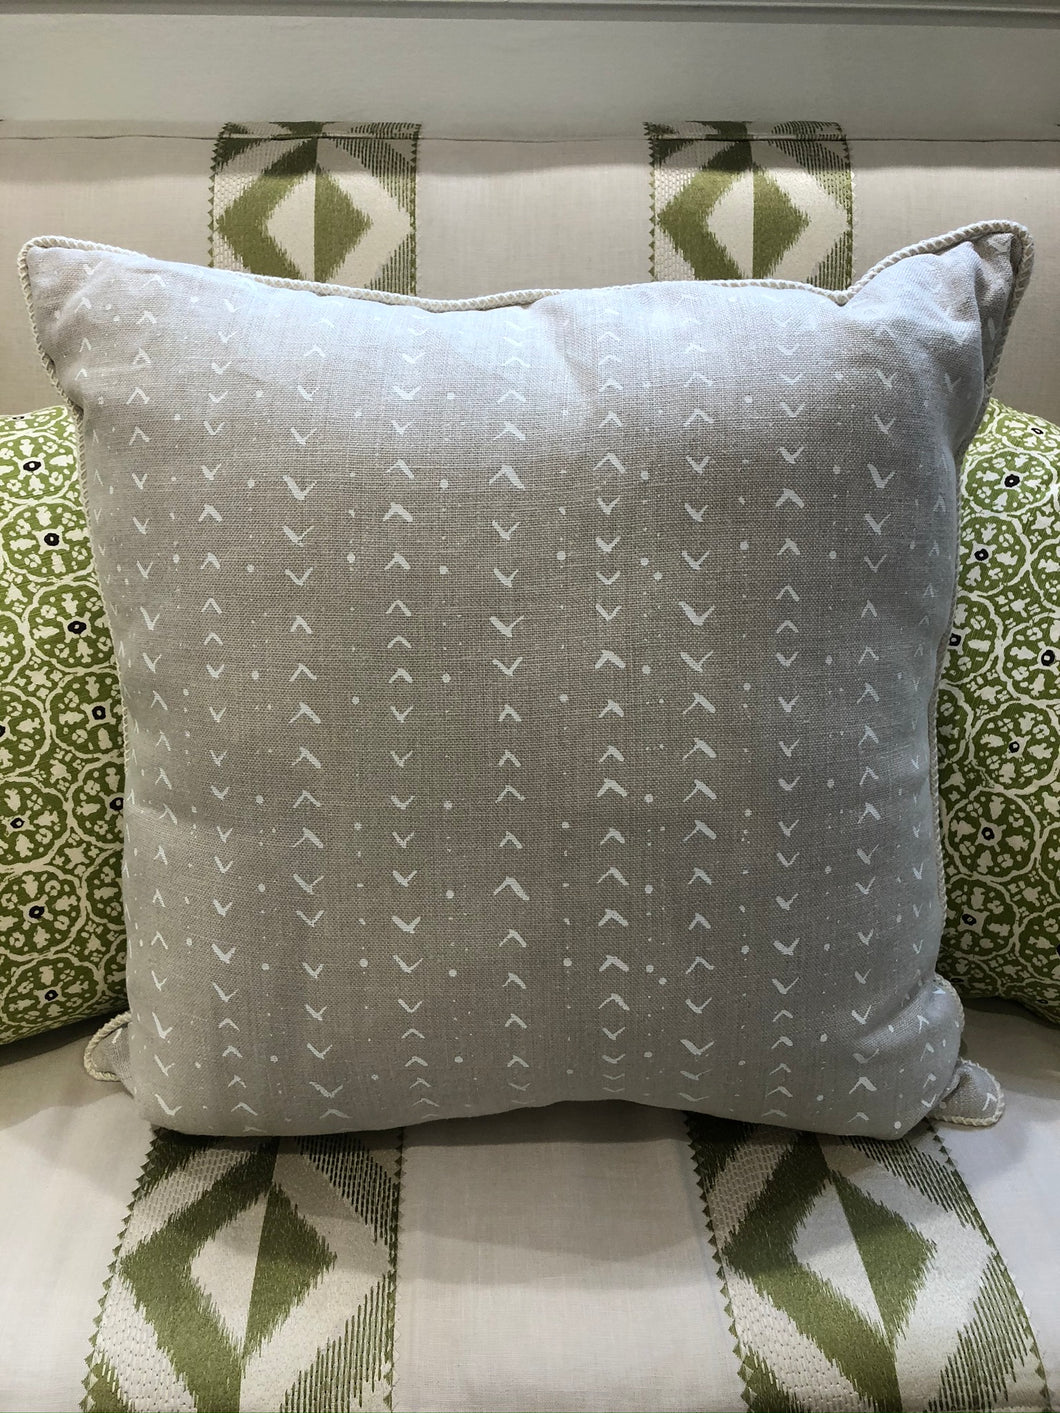 Printed White Triangle on Natural Linen Pillow 23